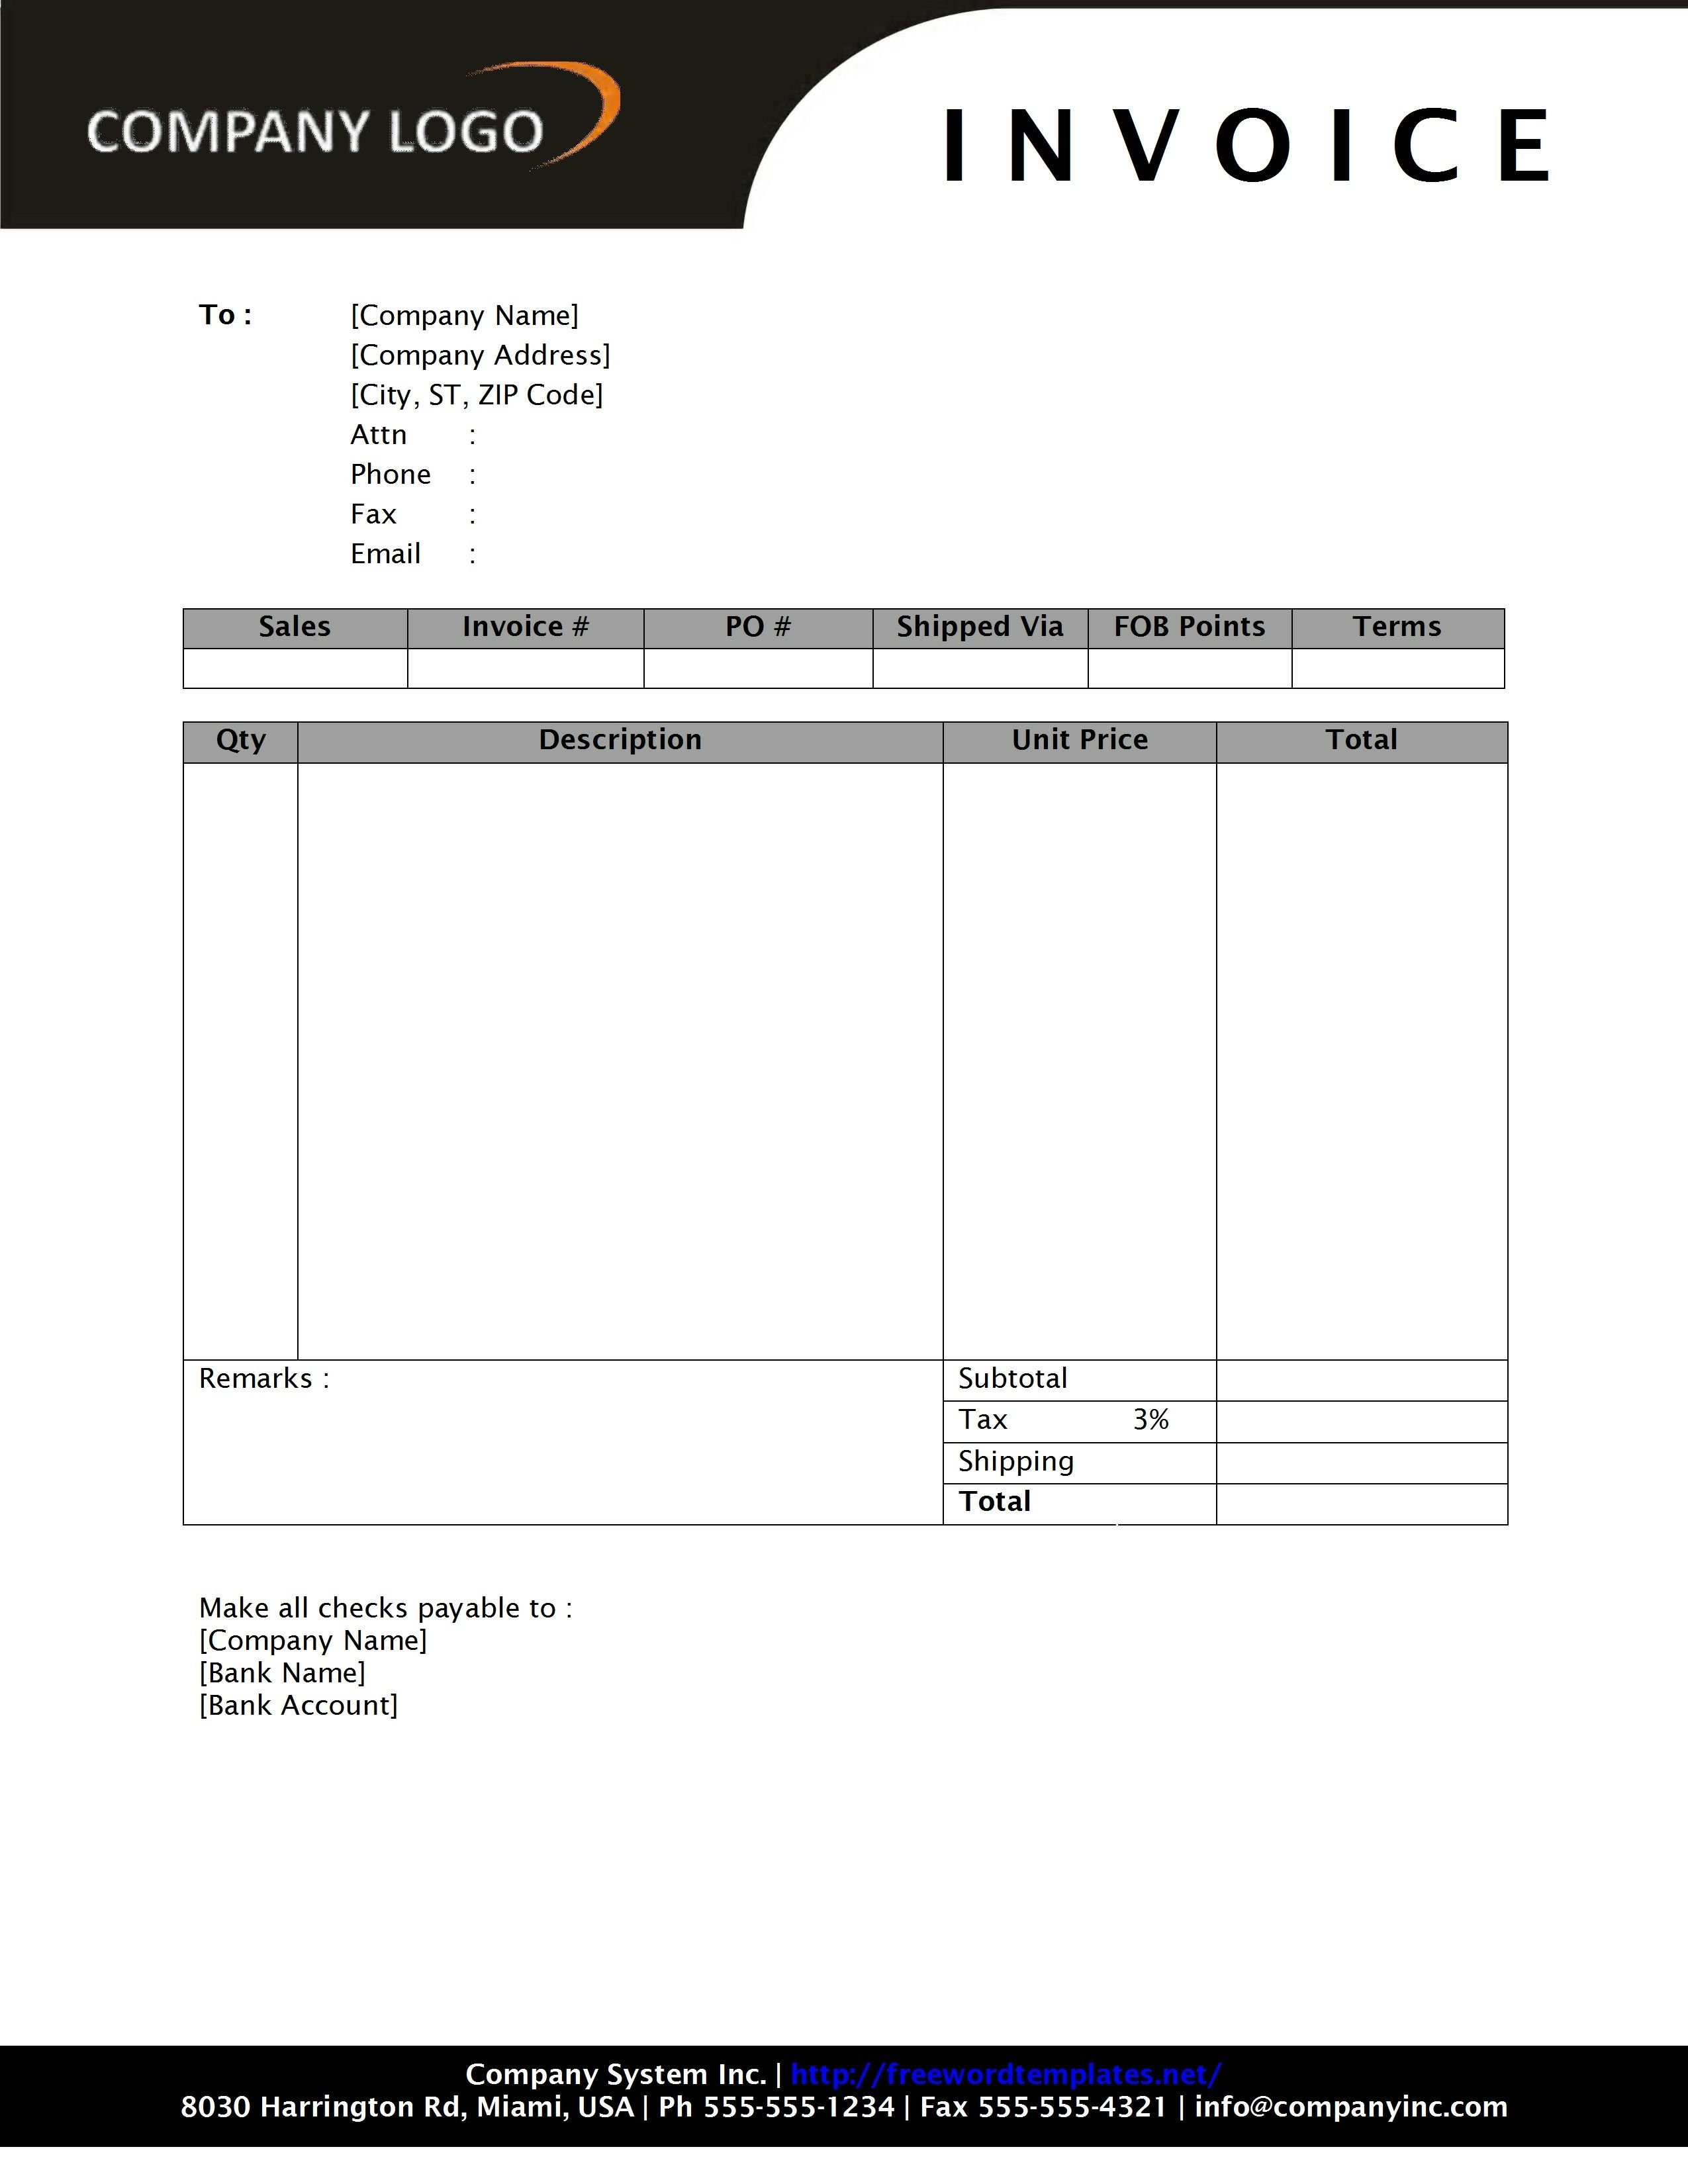 template for invoice free download invoice template free 2016 invoice download free